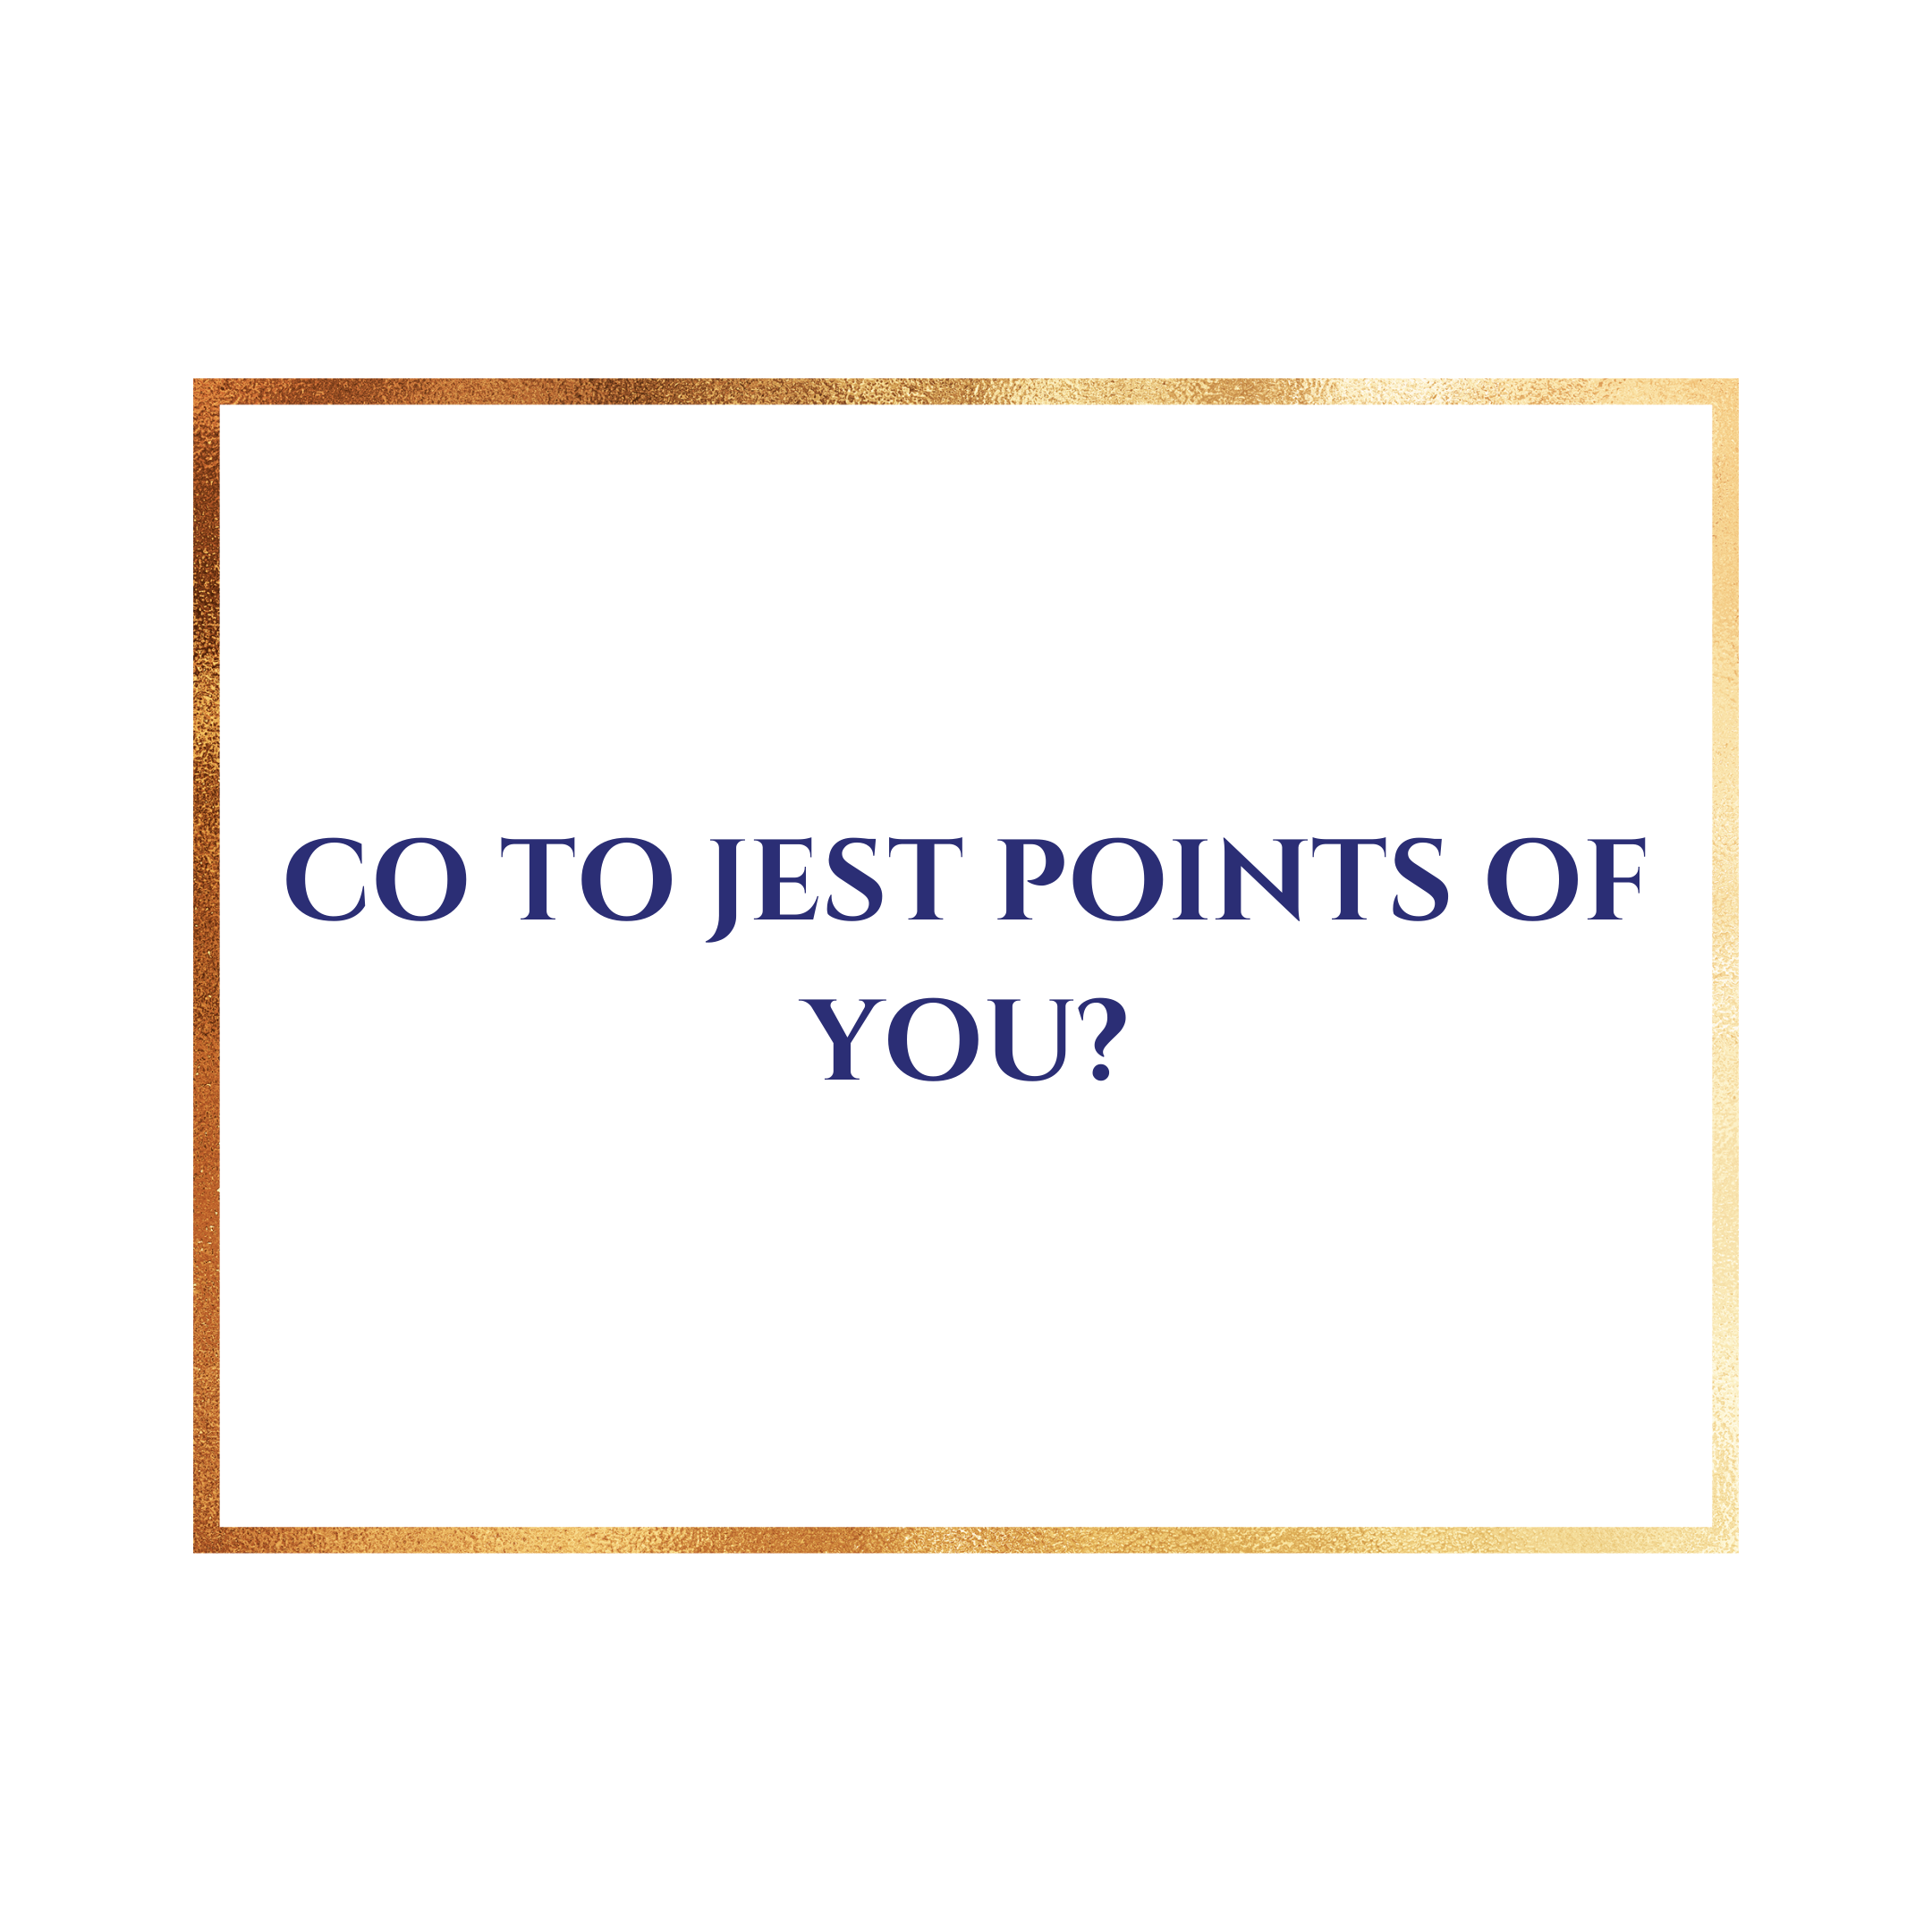 Co to jest Points of You?